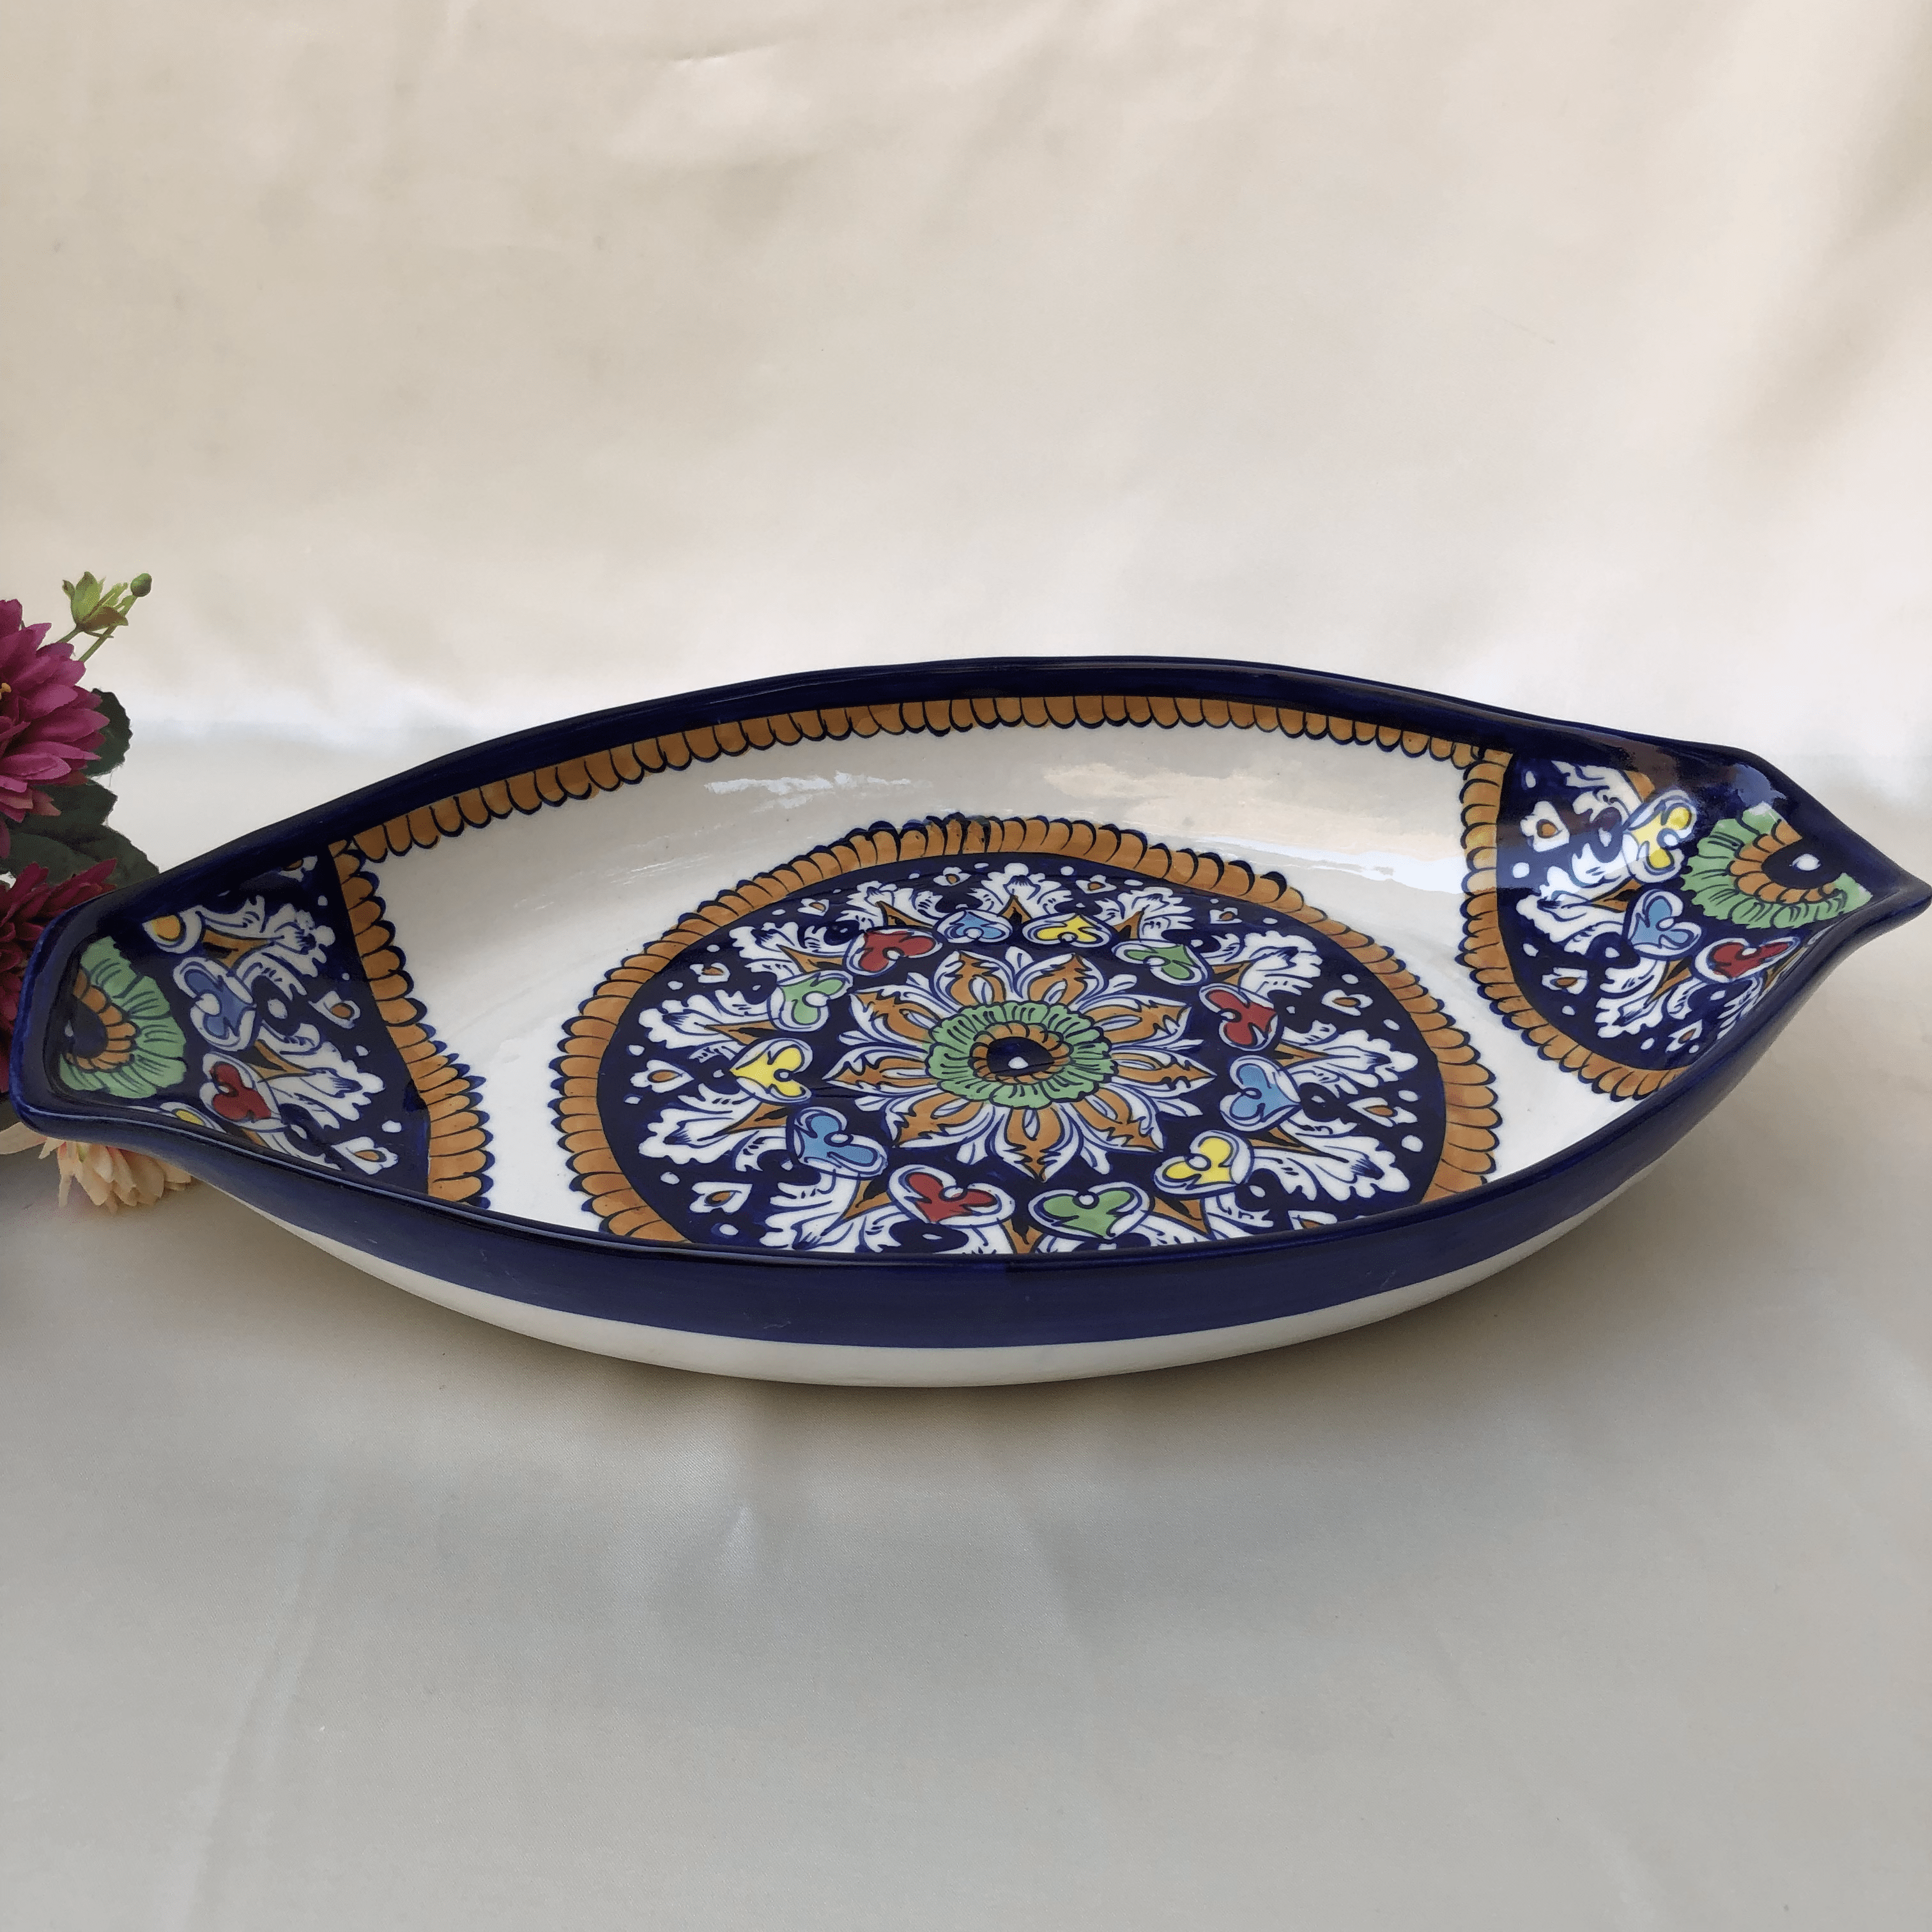 Ceramic New Tranquility Oval Dish